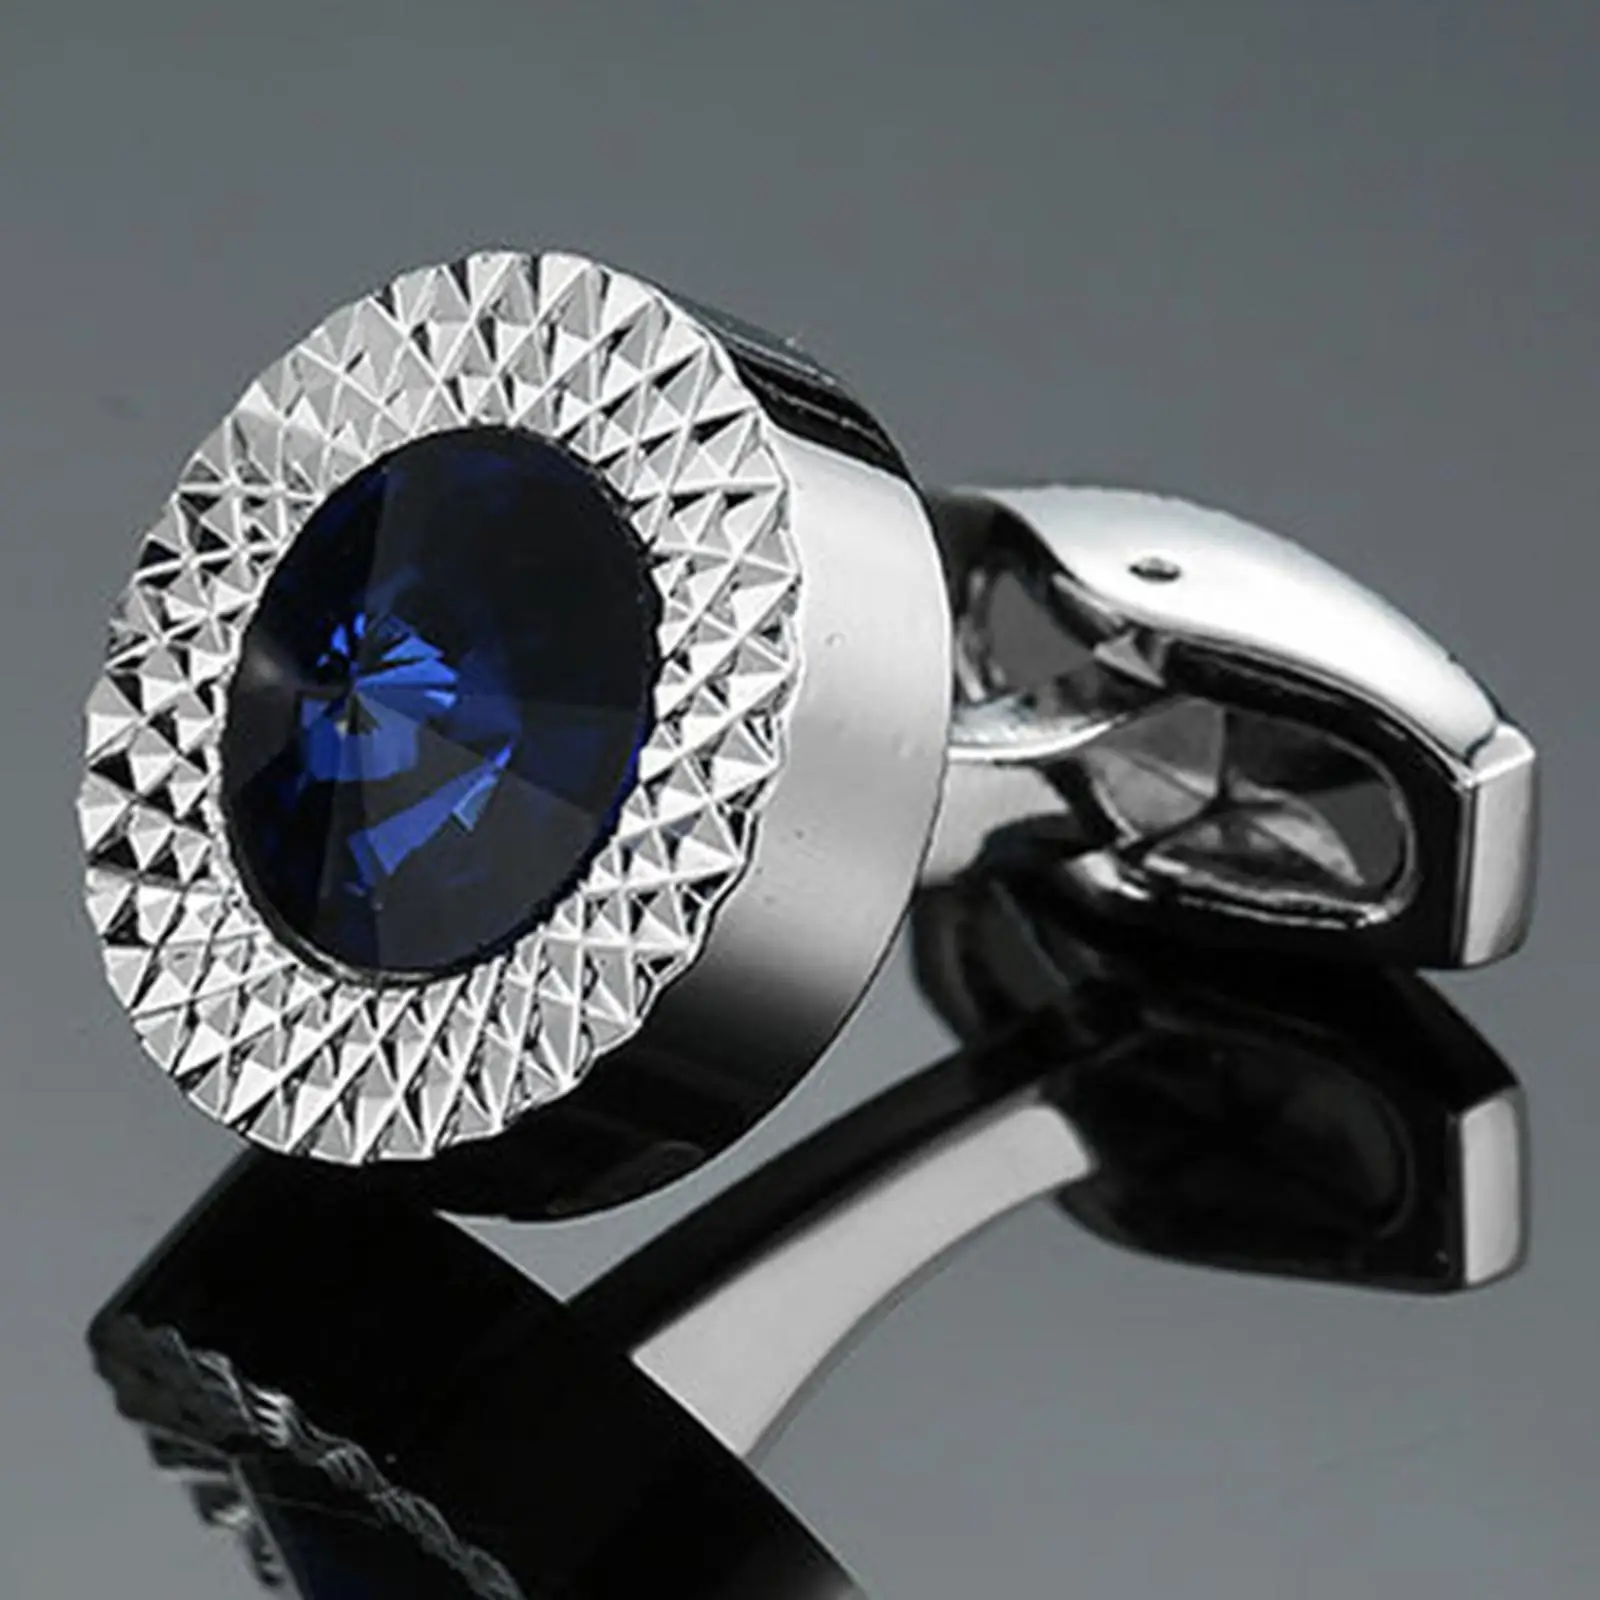 Classy Stylish Cuff Links Jewelry Simply French Accessories for Wedding